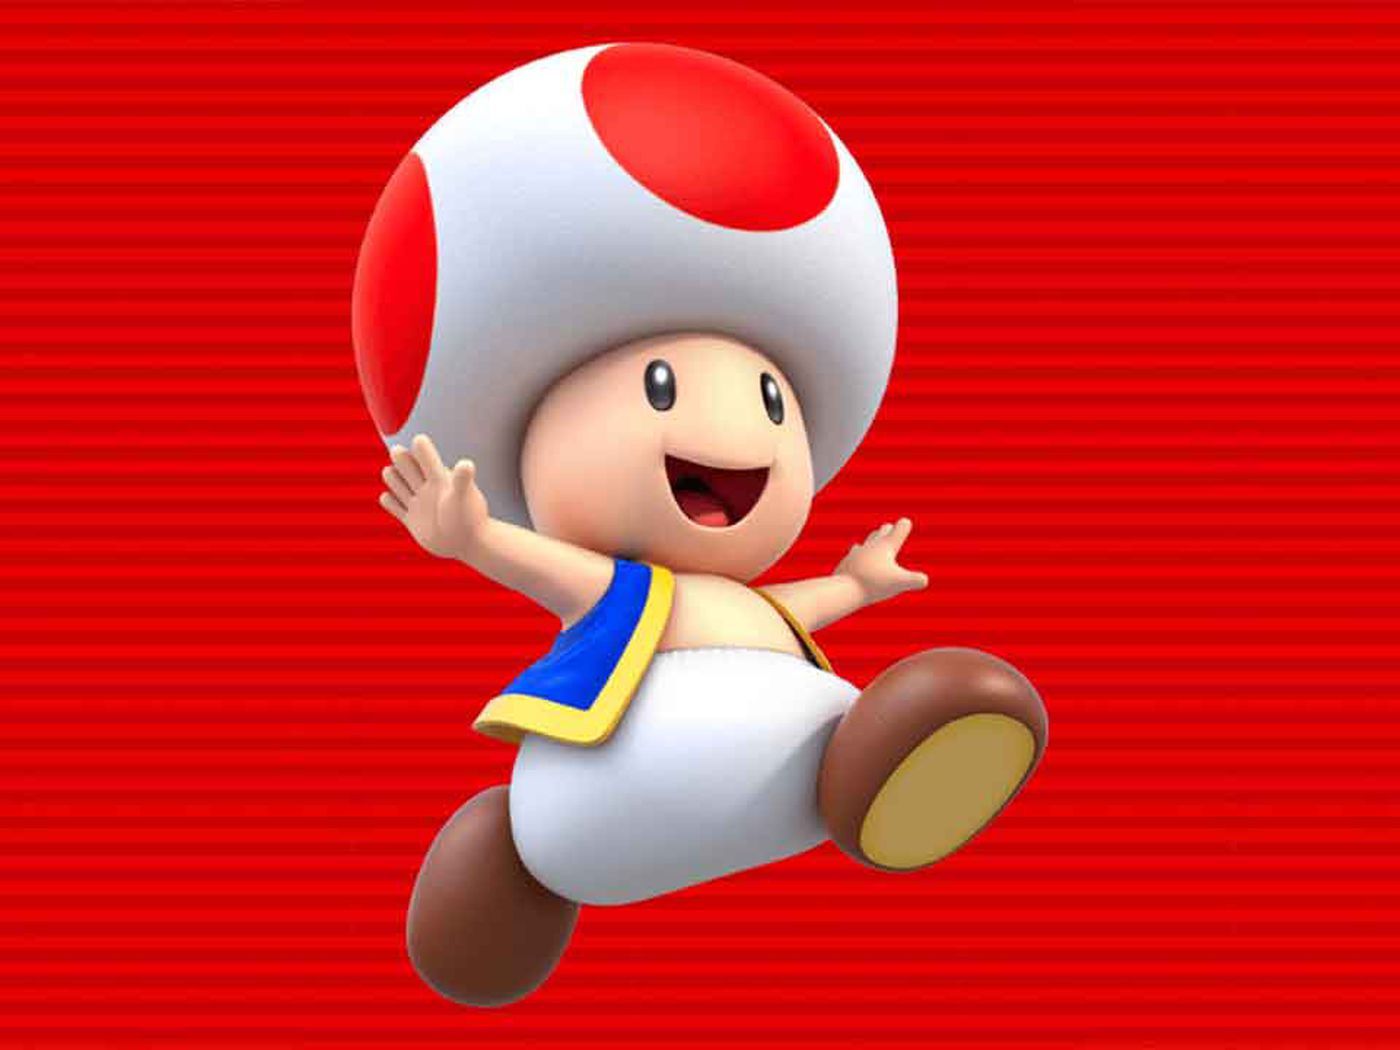 How to unlock and play as Toad in Super Mario Run